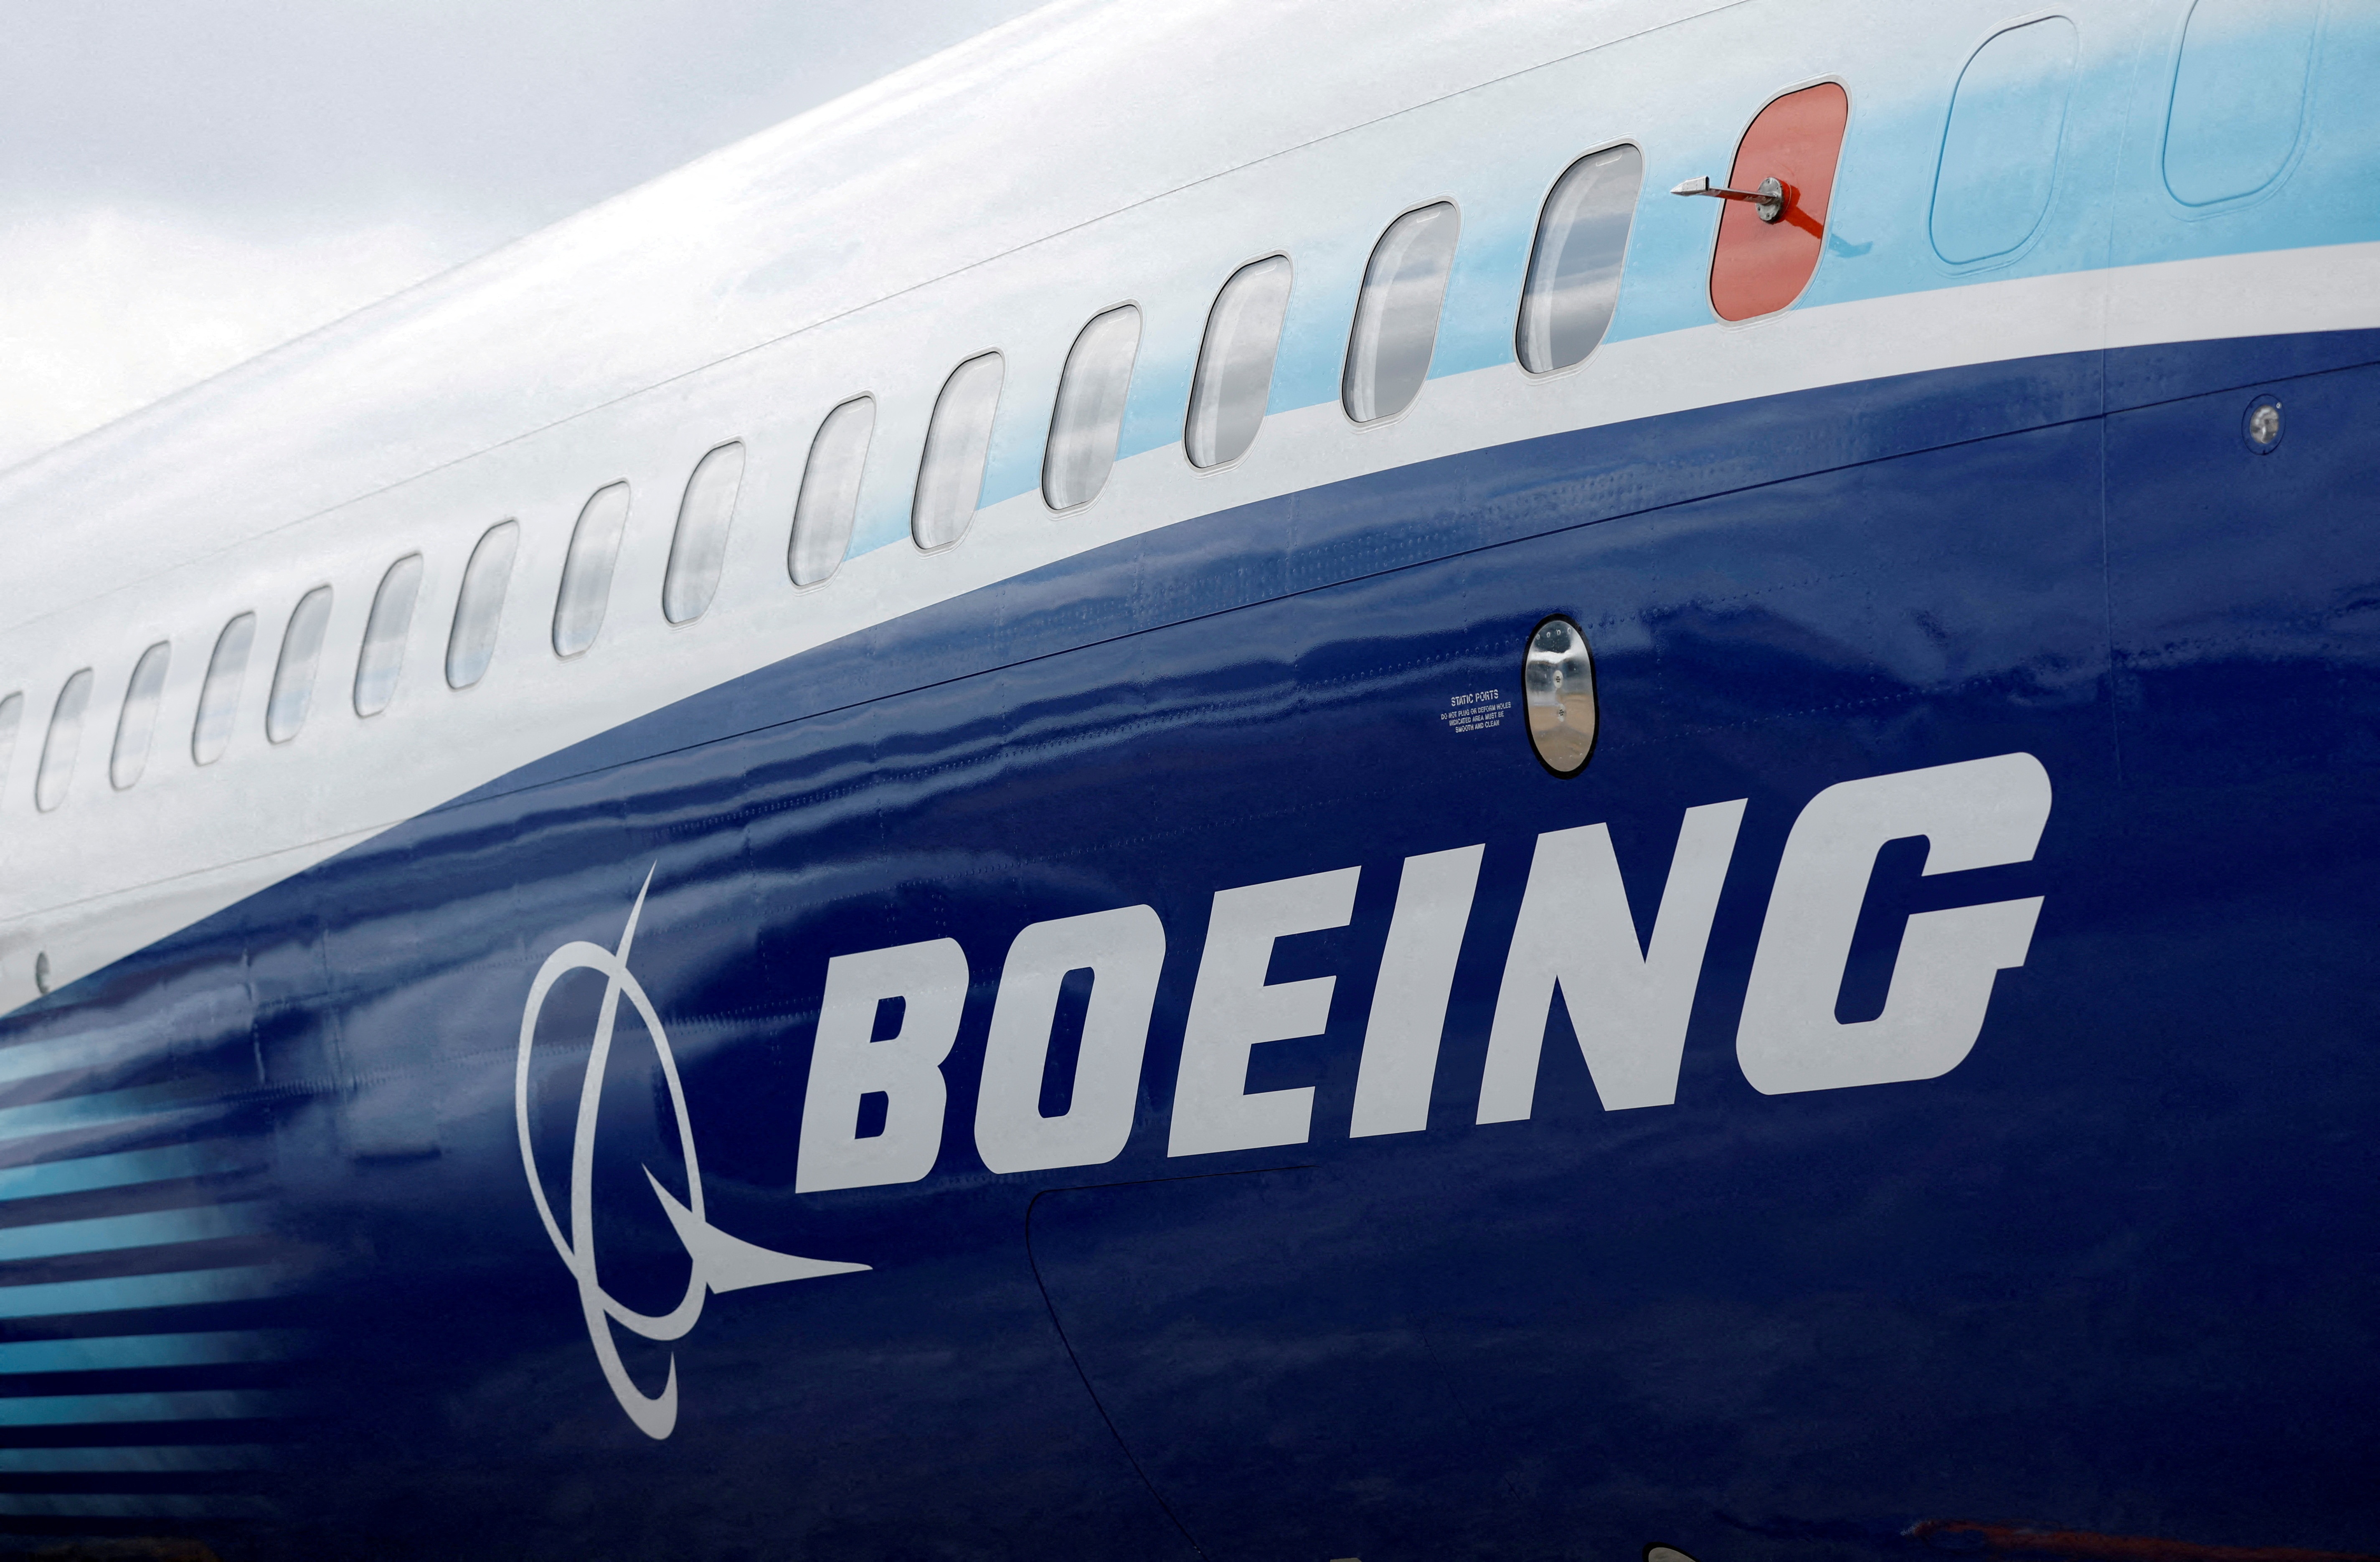 Boeing submits solutions to a range of safety issues